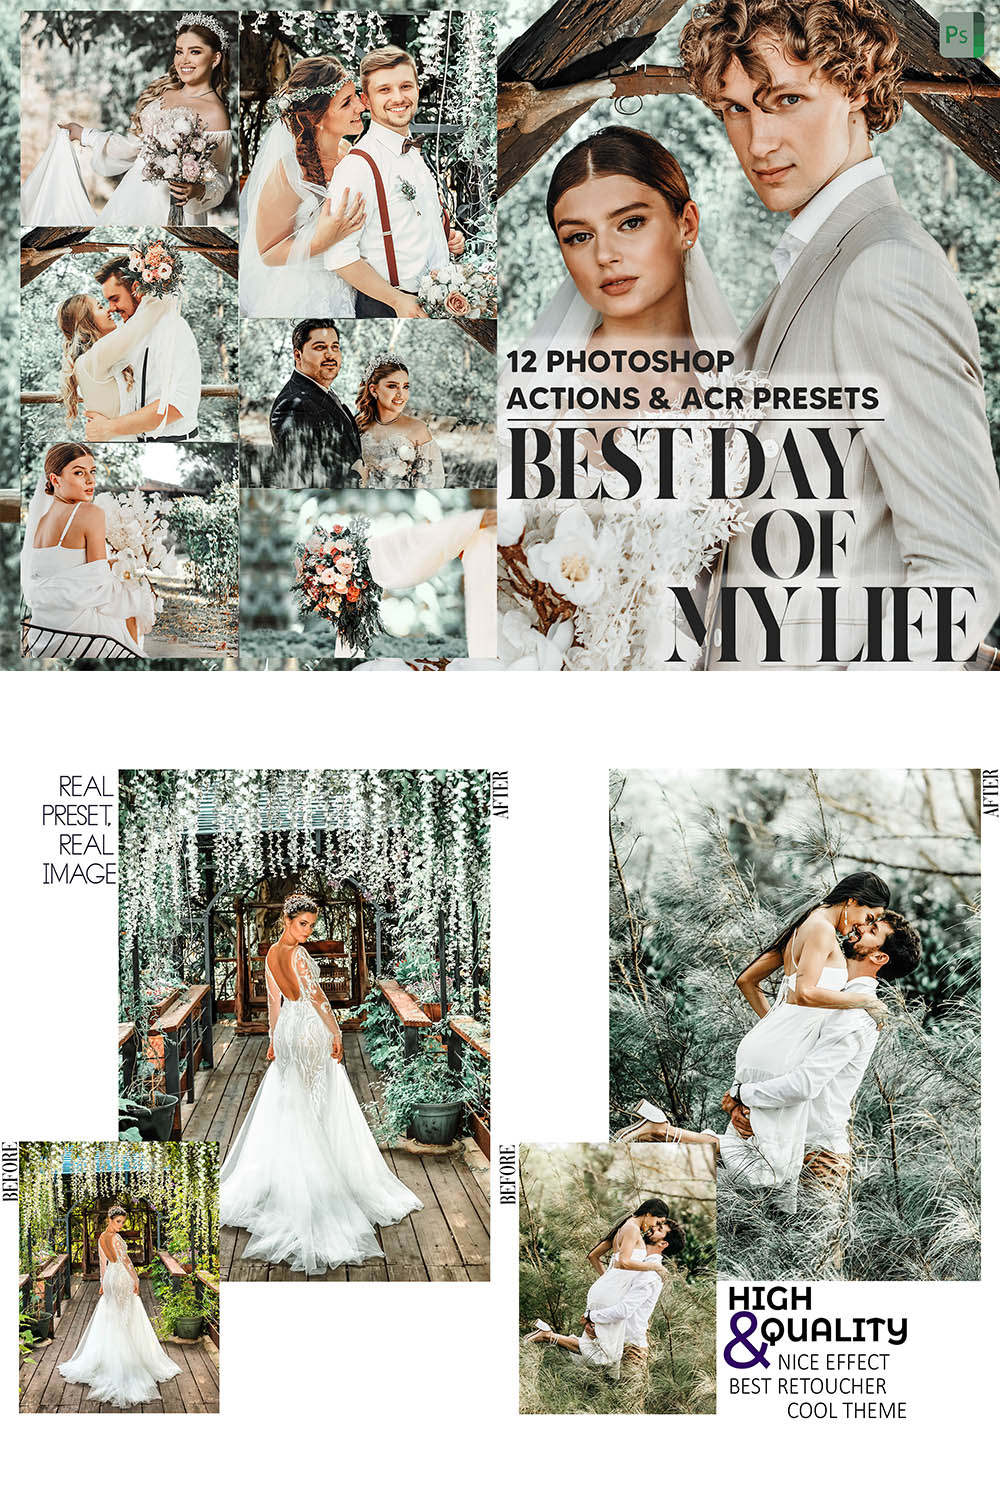 12 Photoshop Actions, Best Day Of My Life Ps Action, Wedding ACR Preset, Bridal Ps Filter, Atn Portrait Lifestyle Theme Instagram, Blogger pinterest preview image.